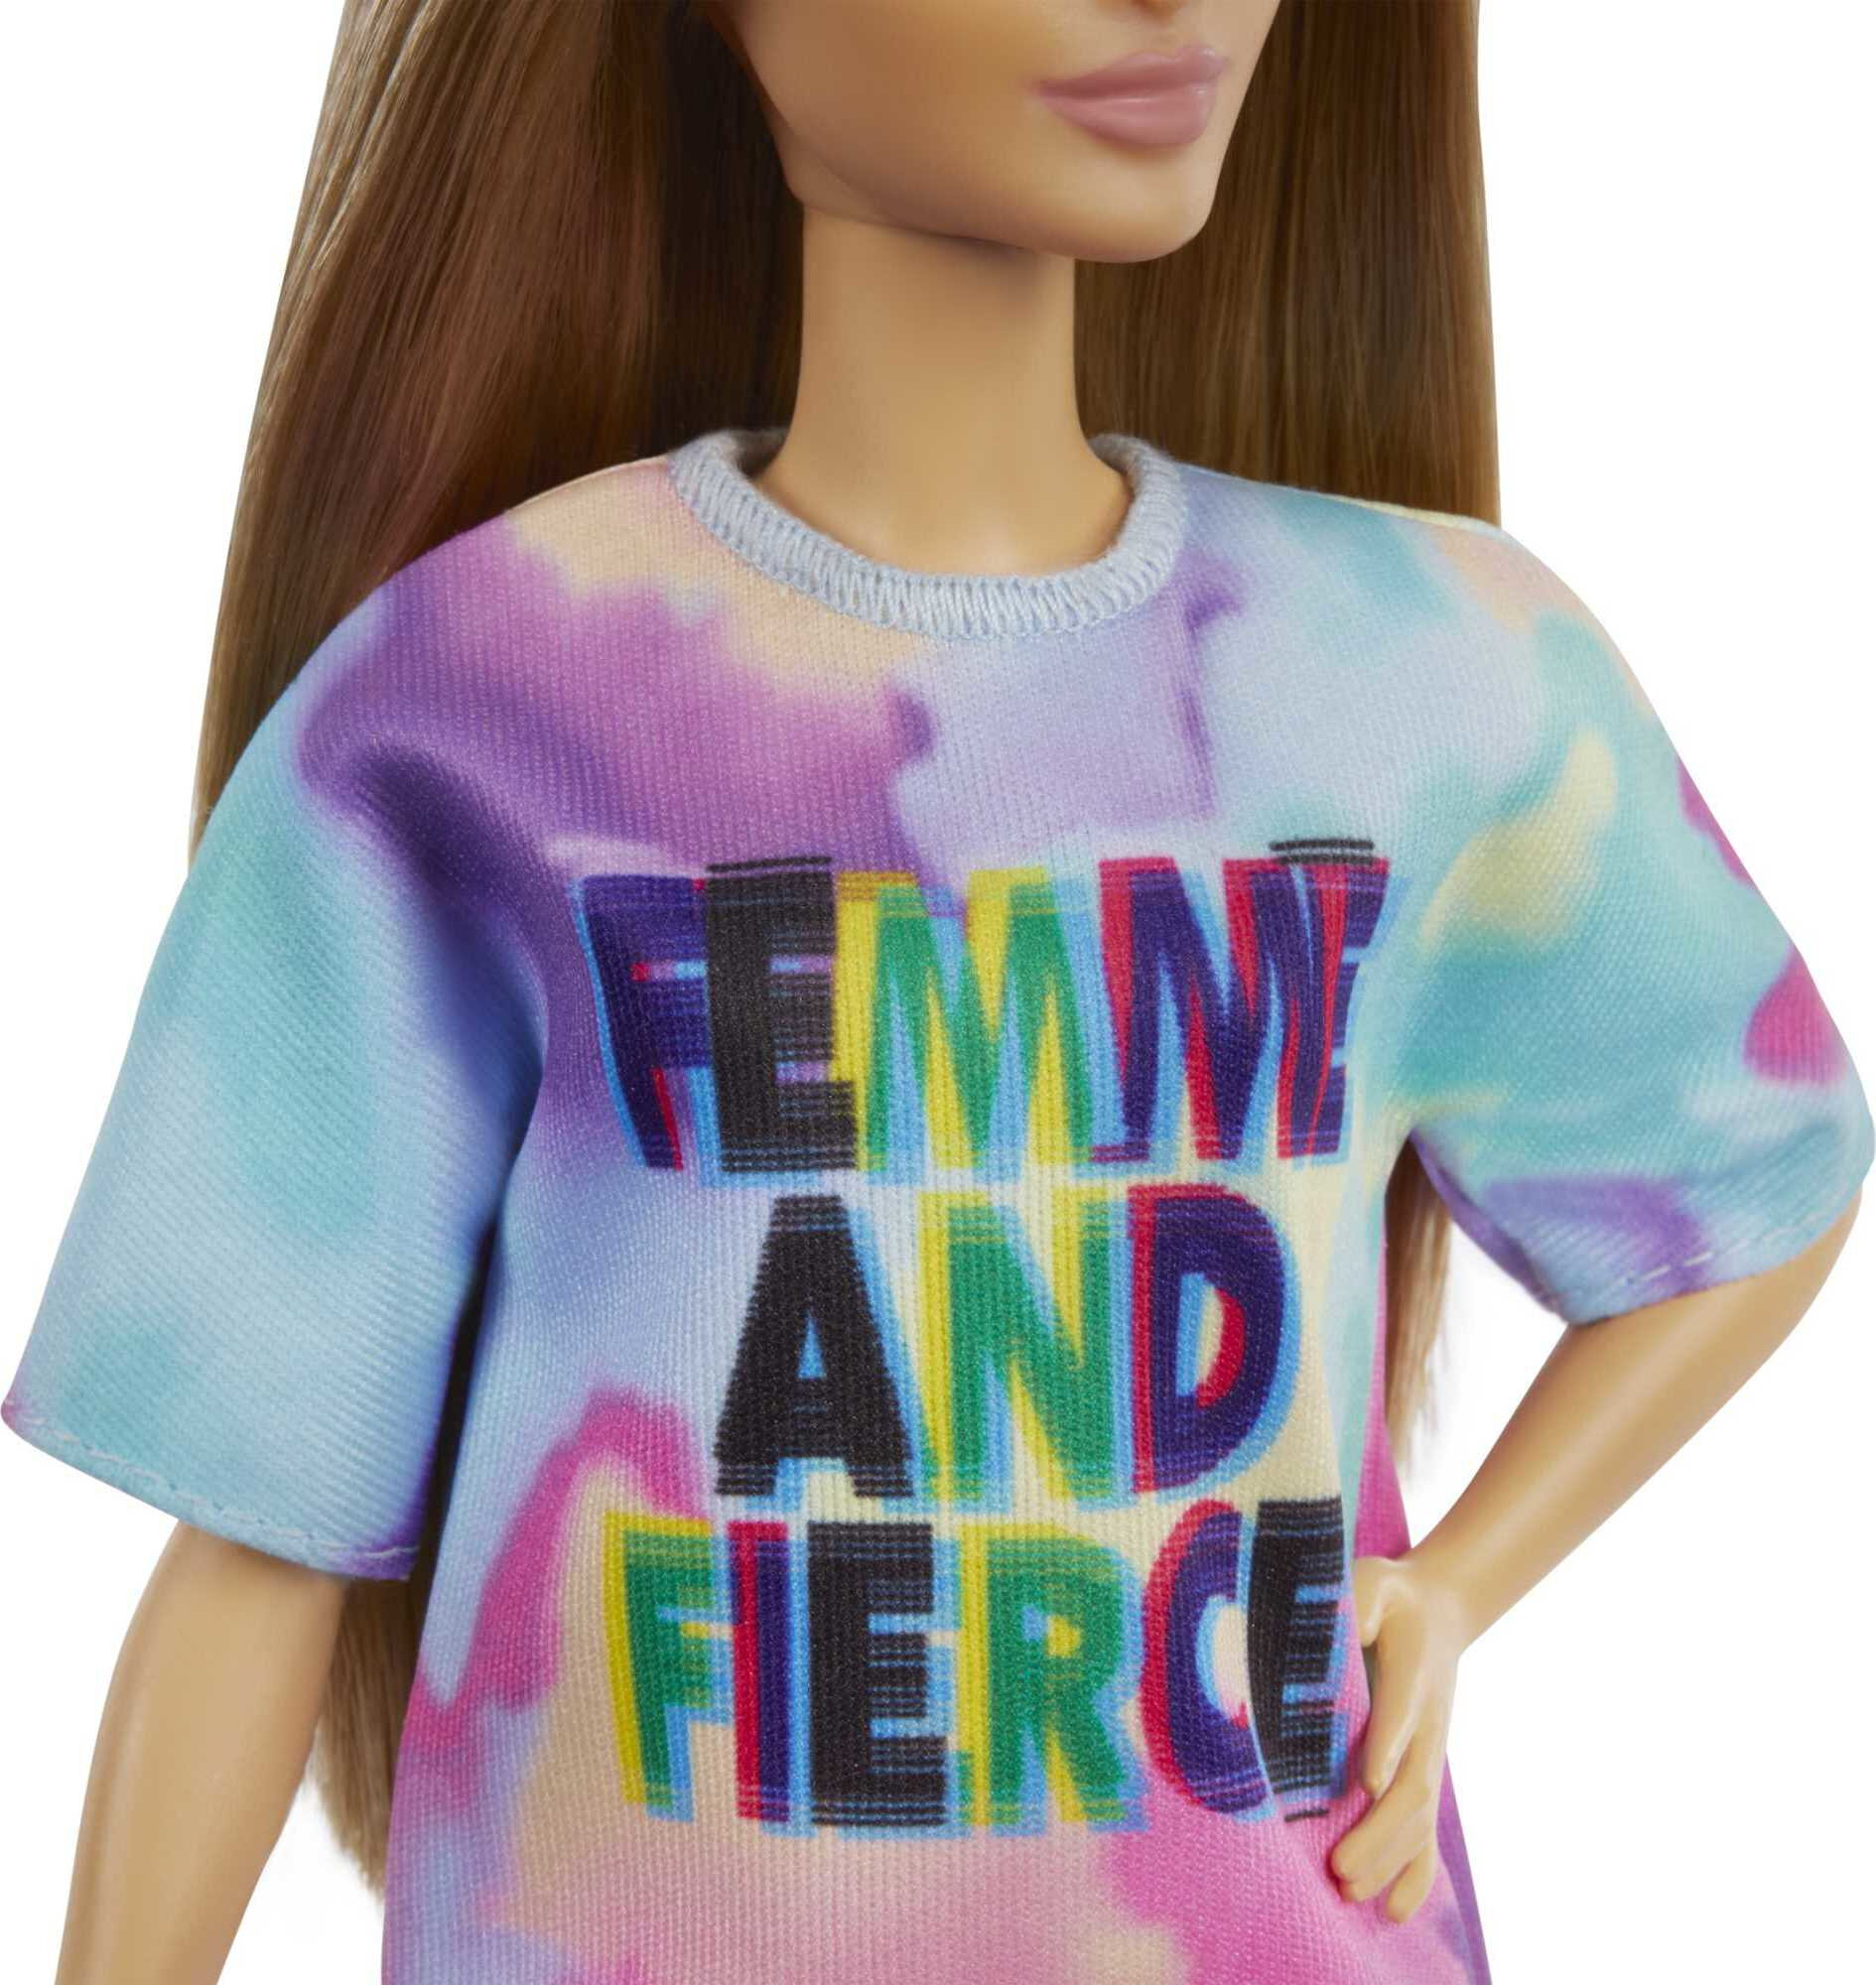 Barbie Fashionistas Doll, Petite, with Light Brown Hair Wearing Tie-Dye T-Shirt Dress, White Shoes & Visor, Toy for Kids 3 to 8 Years Old - image 5 of 7